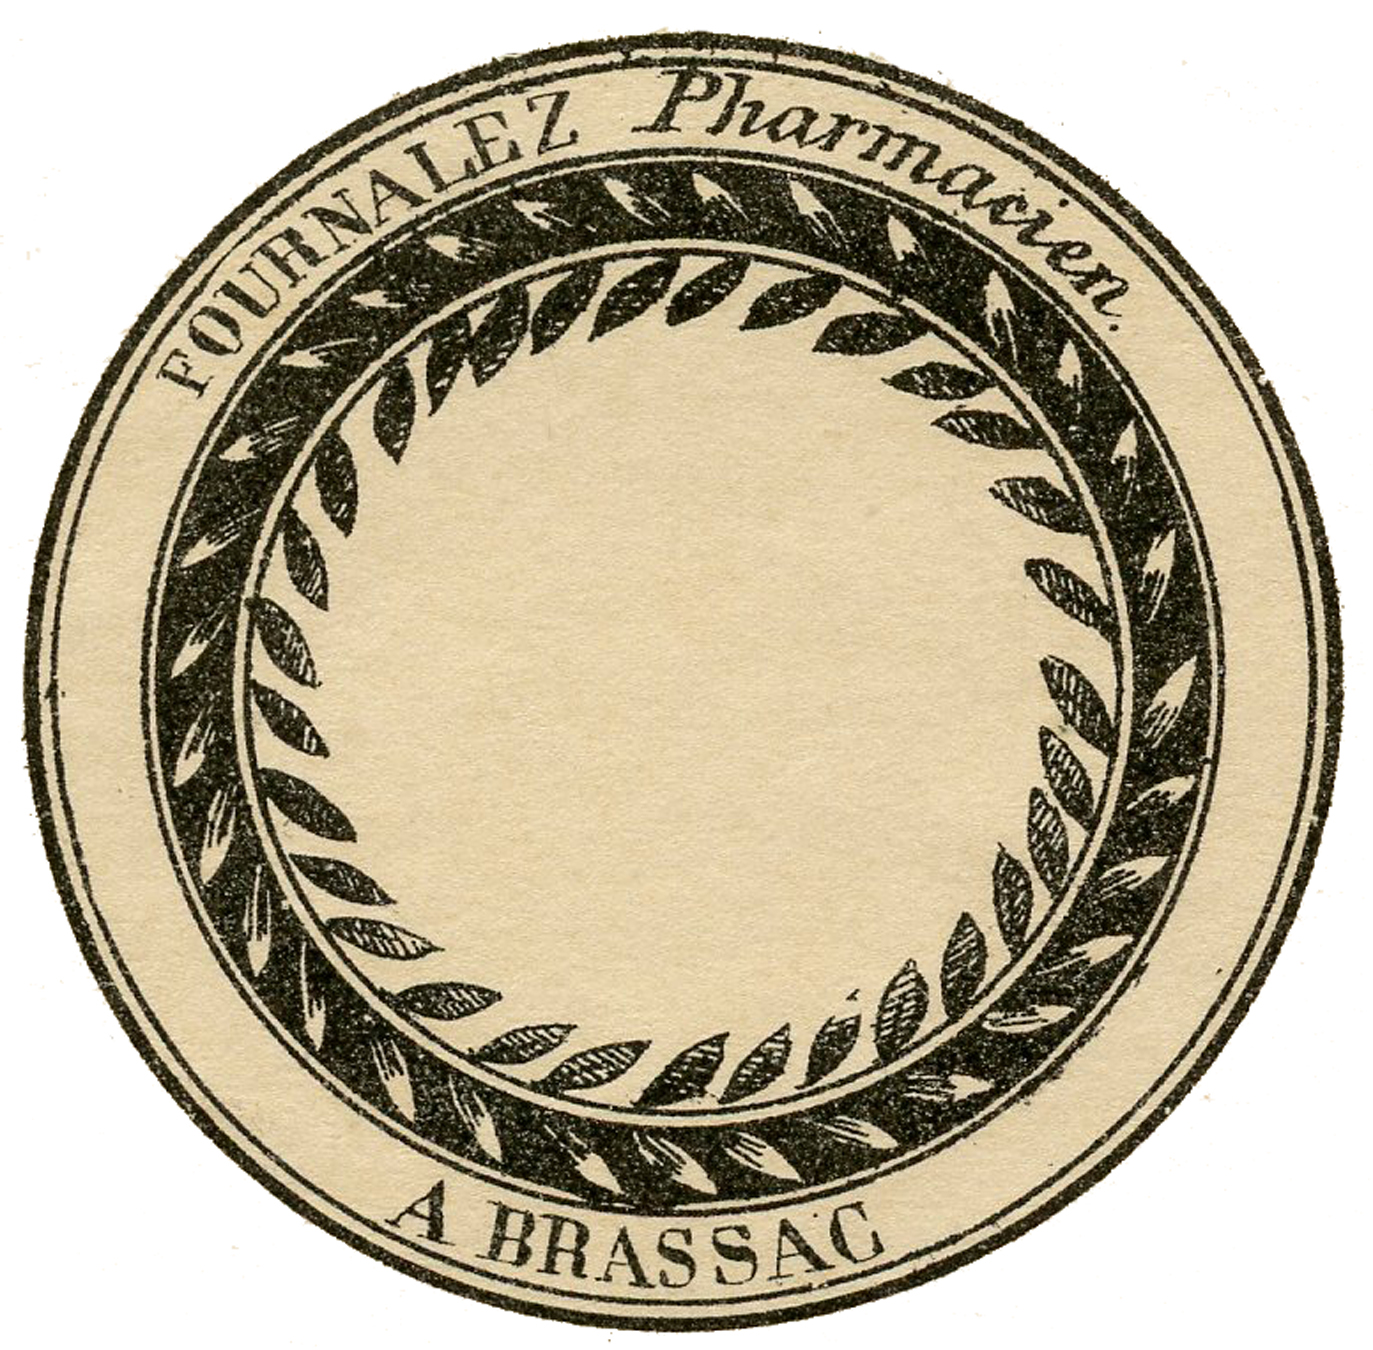 French apothecary round label image